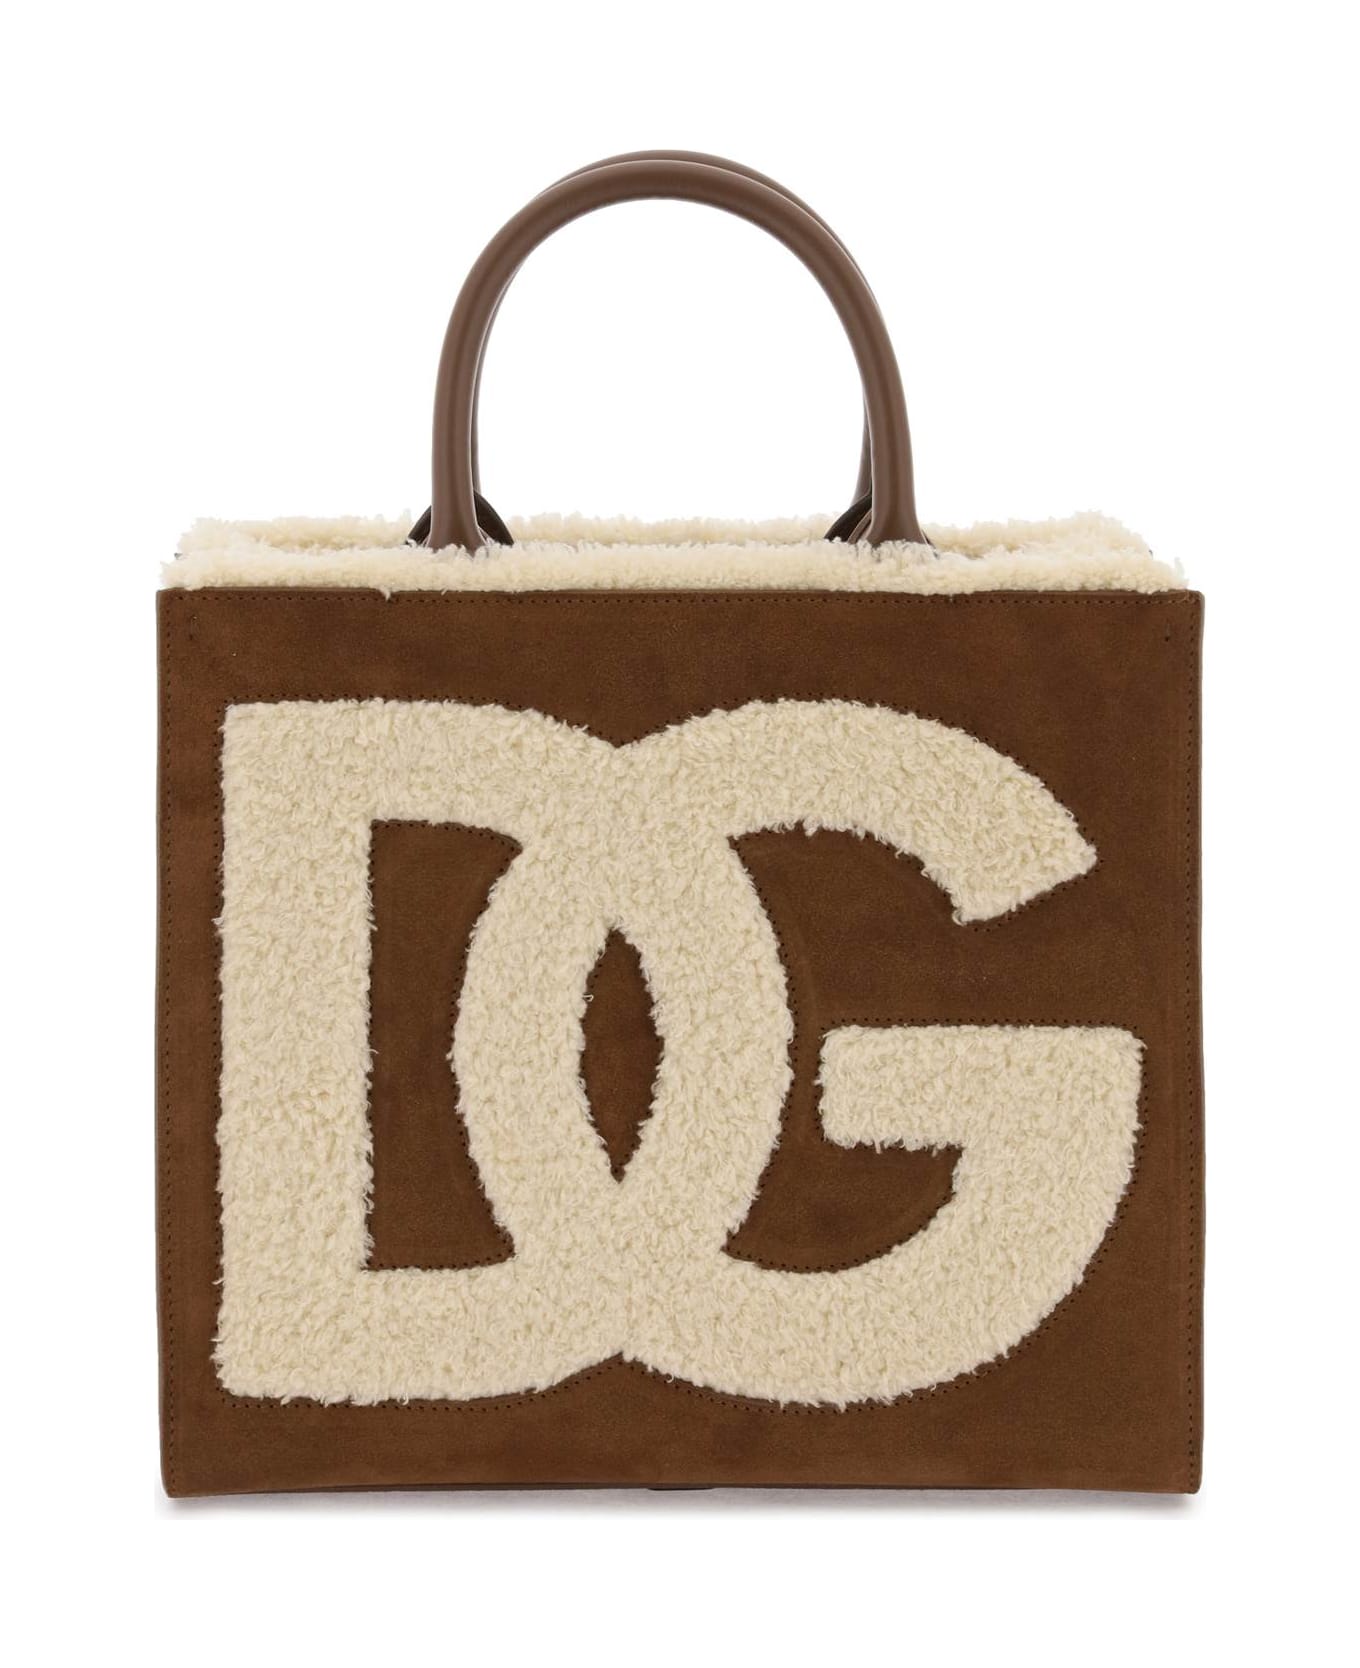 Dolce & Gabbana Daily Shopping Bag With Maxi Logo - brown トートバッグ